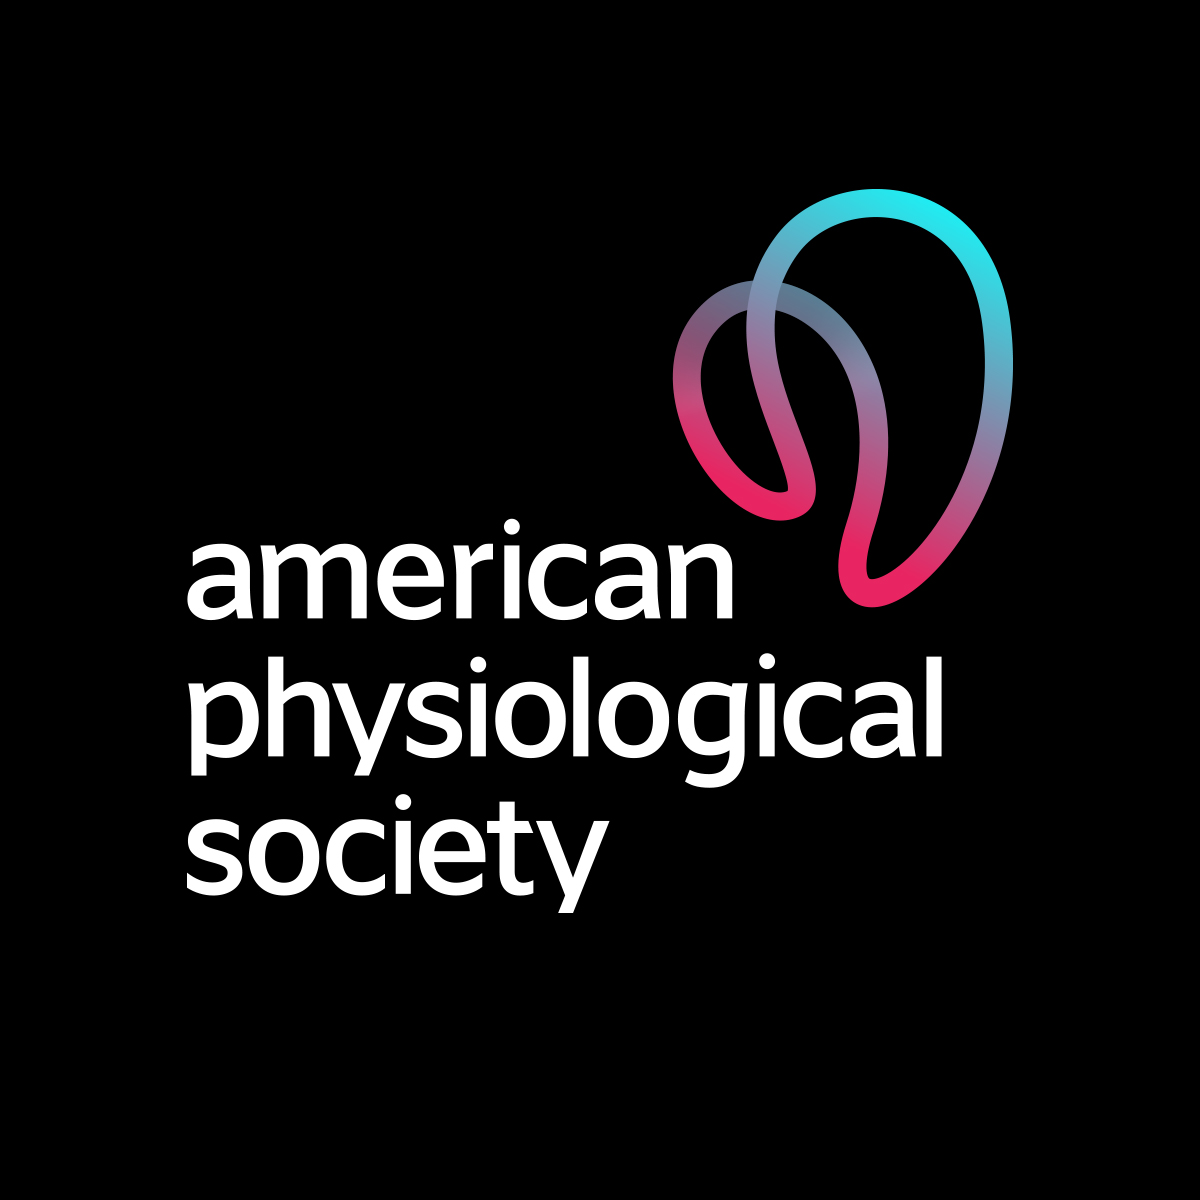 American Physiological Society (APS)